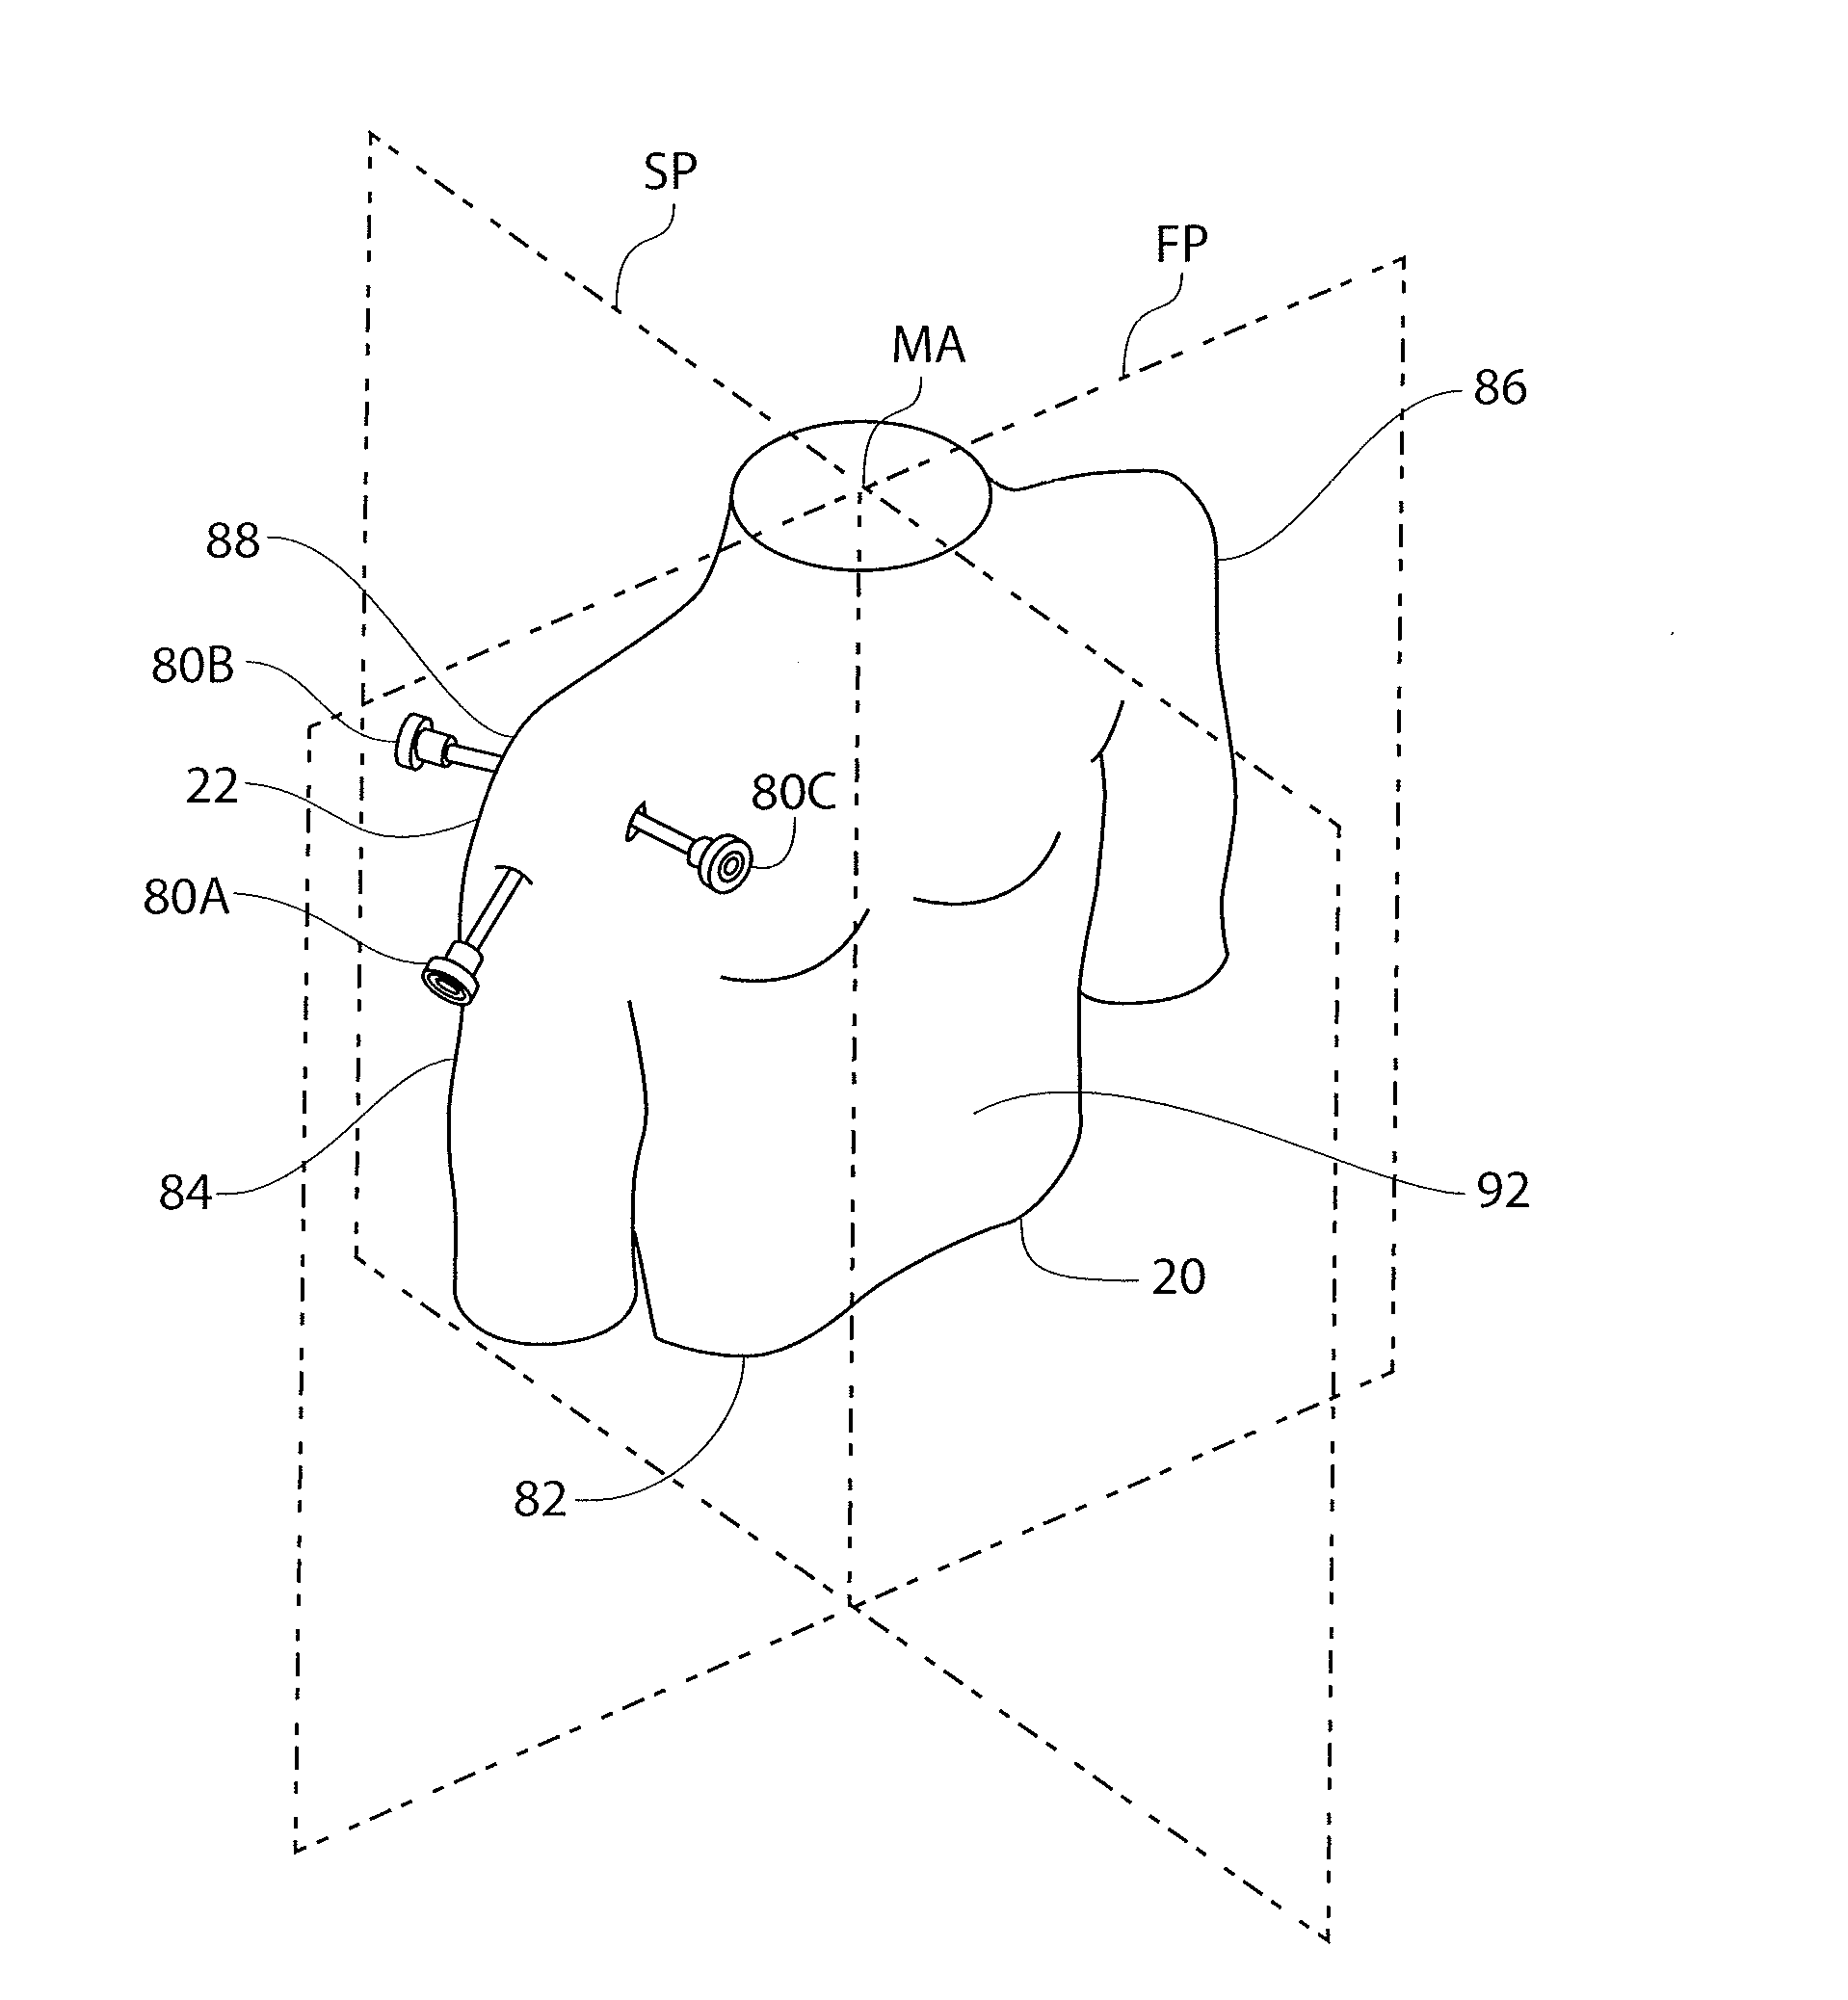 Anatomical location markers and methods of use in positioning sheet-like materials during surgery